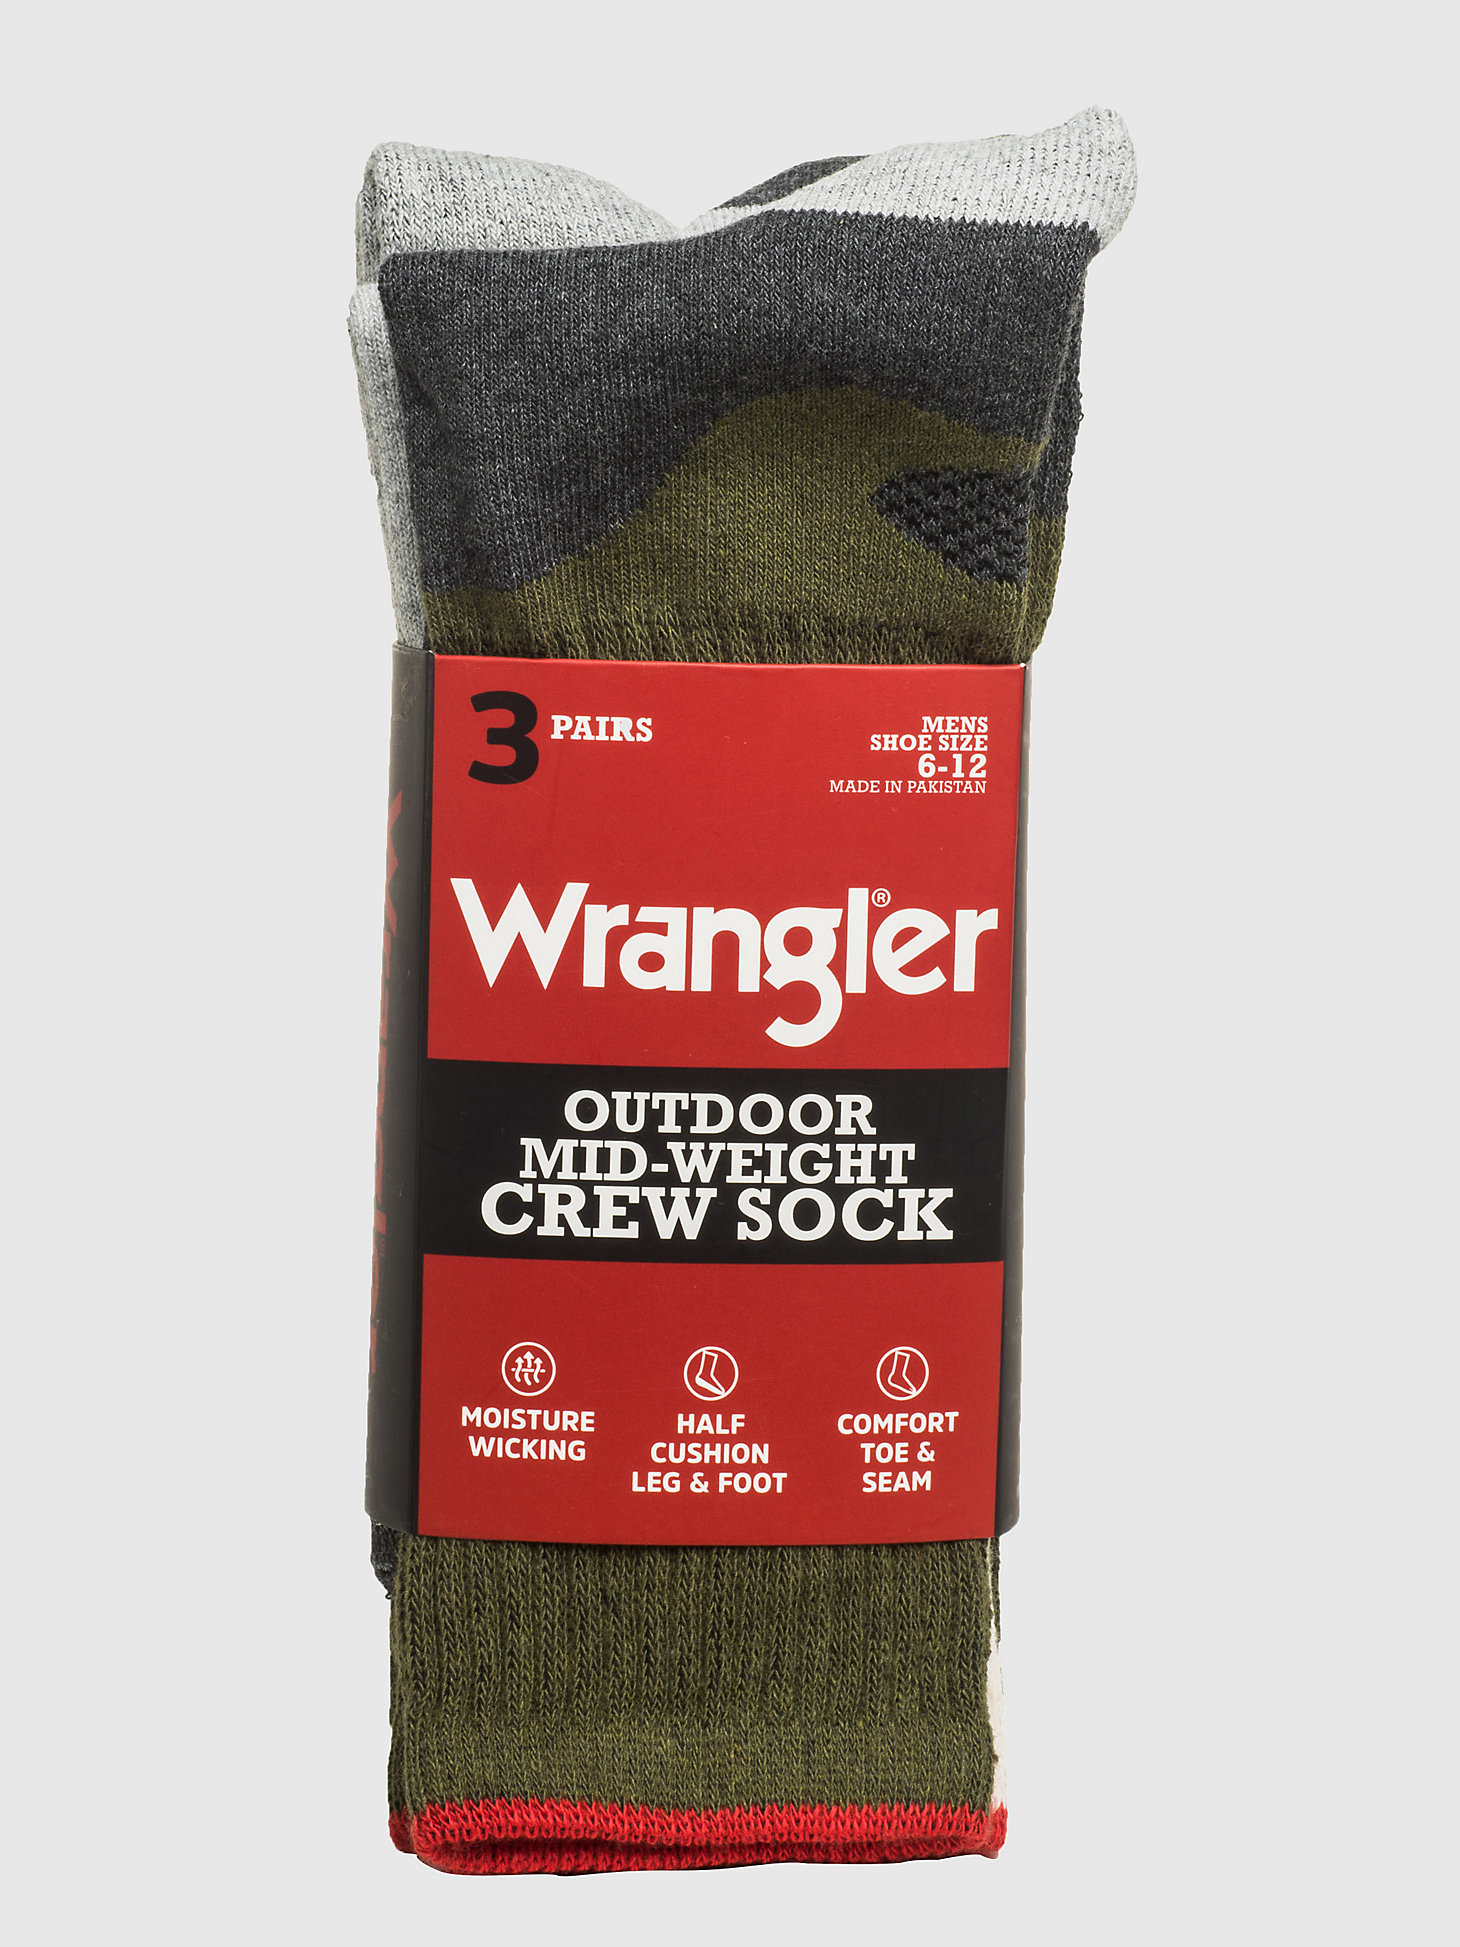 Men's Wrangler Mid-Weight Crew Work Socks (3-Pack) in Army Green alternative view 5